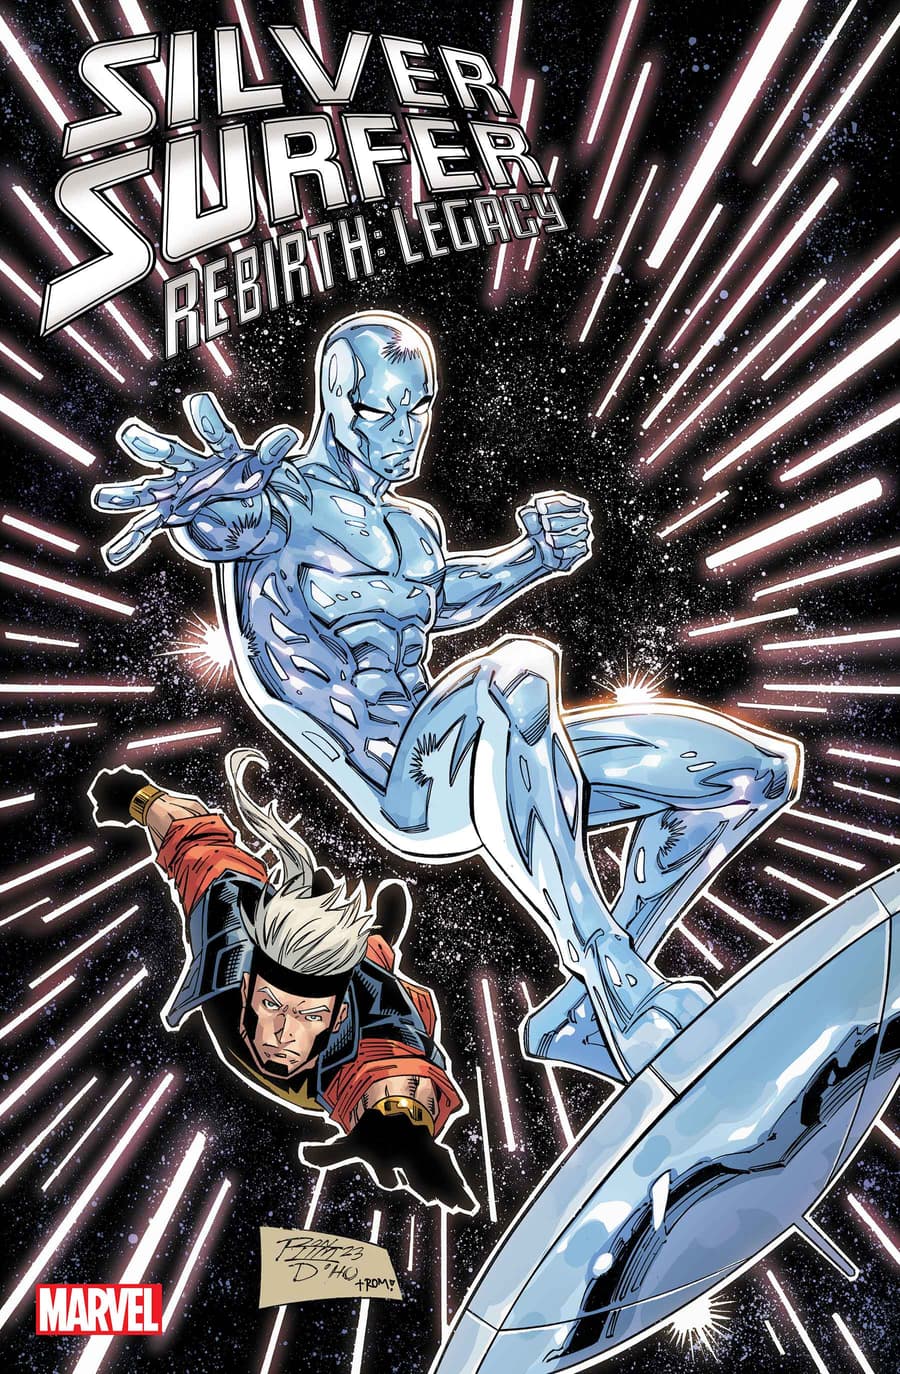 SILVER SURFER REBIRTH: LEGACY #1 cover by Ron Lim